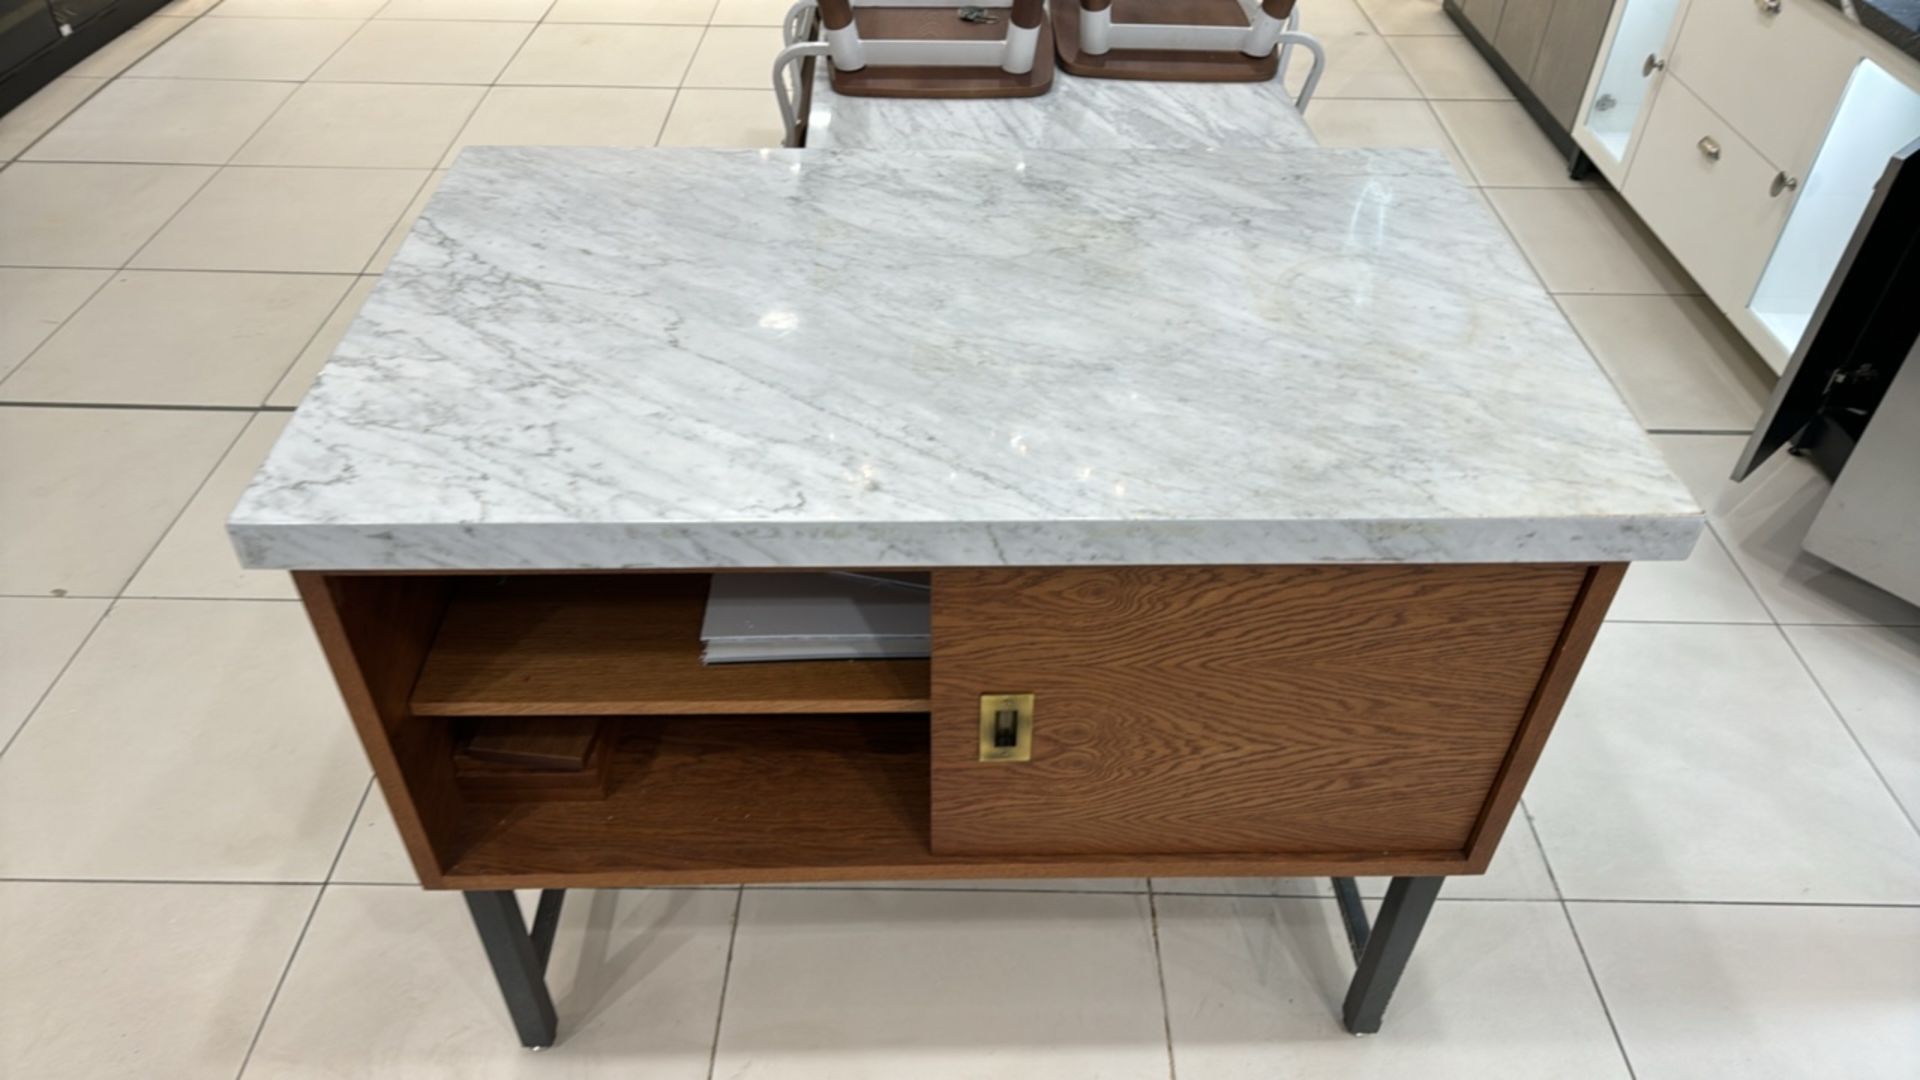 Wooden Retail Display Units with Marble Top - Image 3 of 7